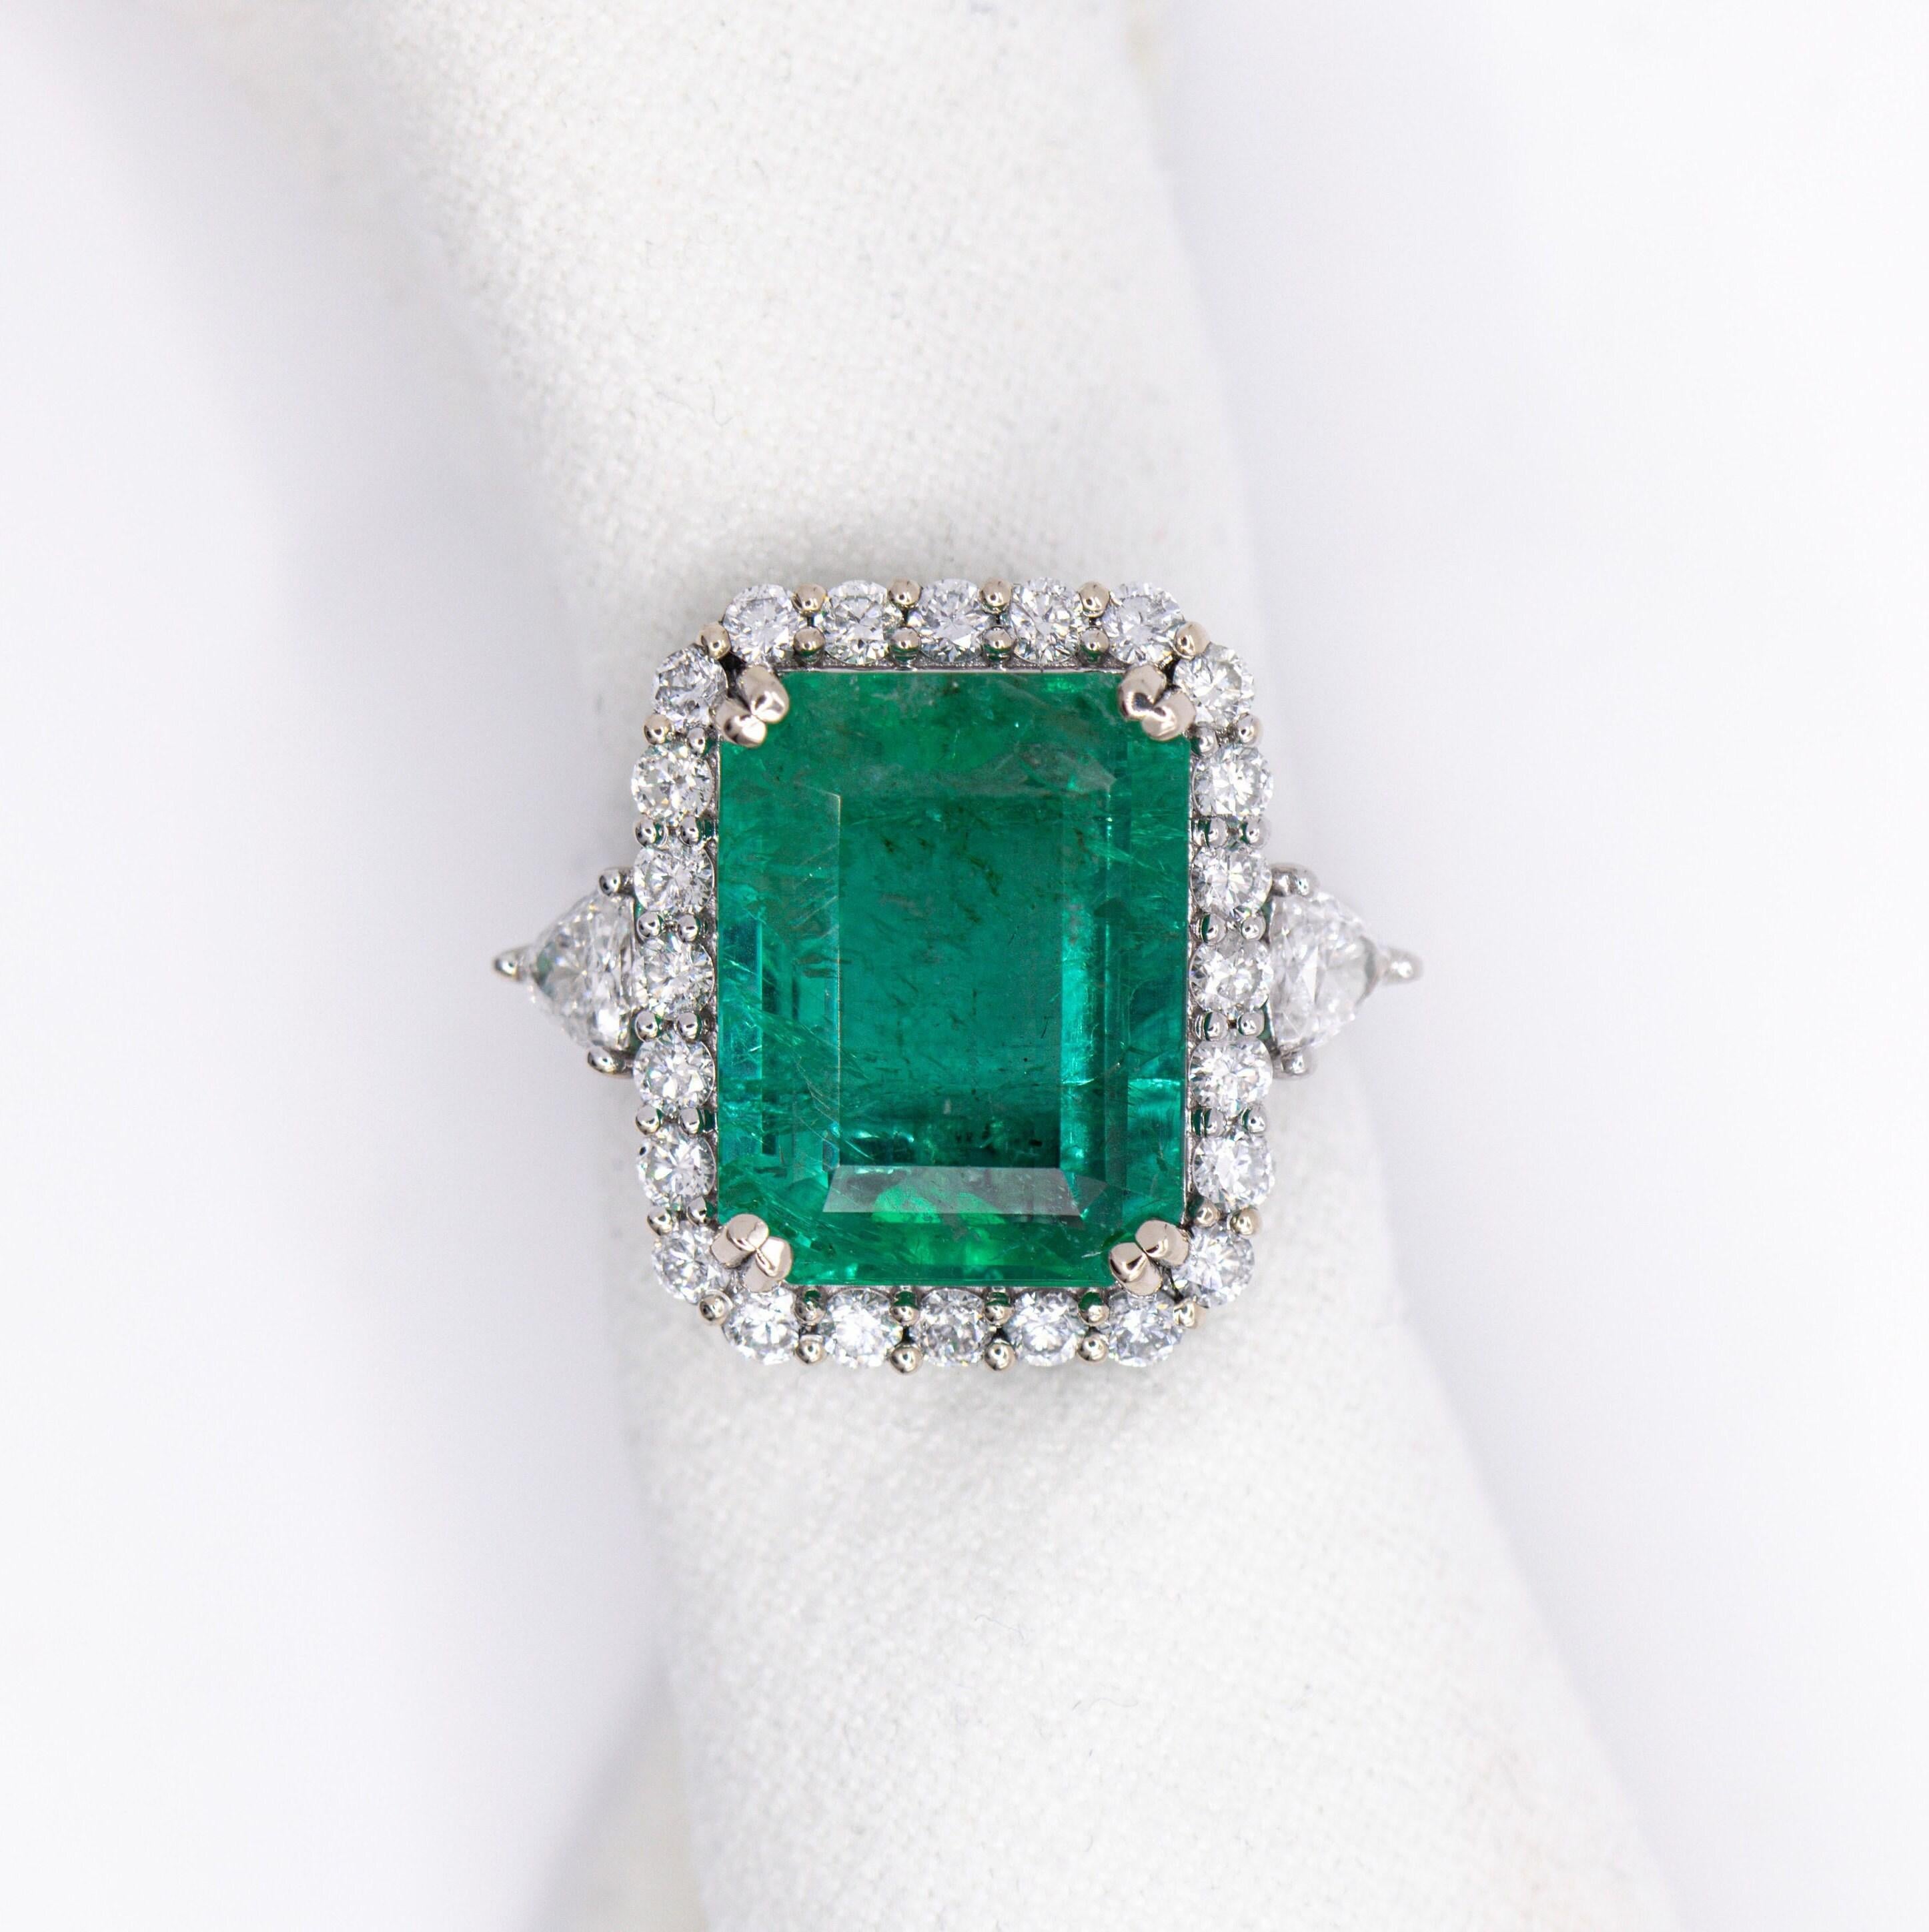 Elegant and classic gold ring with a dazzling emerald center stone accentuated by a natural earth mined diamond halo. Perfect for all occasions such as weddings, anniversaries, promise rings, birthdays, or just because!  
 
Specifications

Item